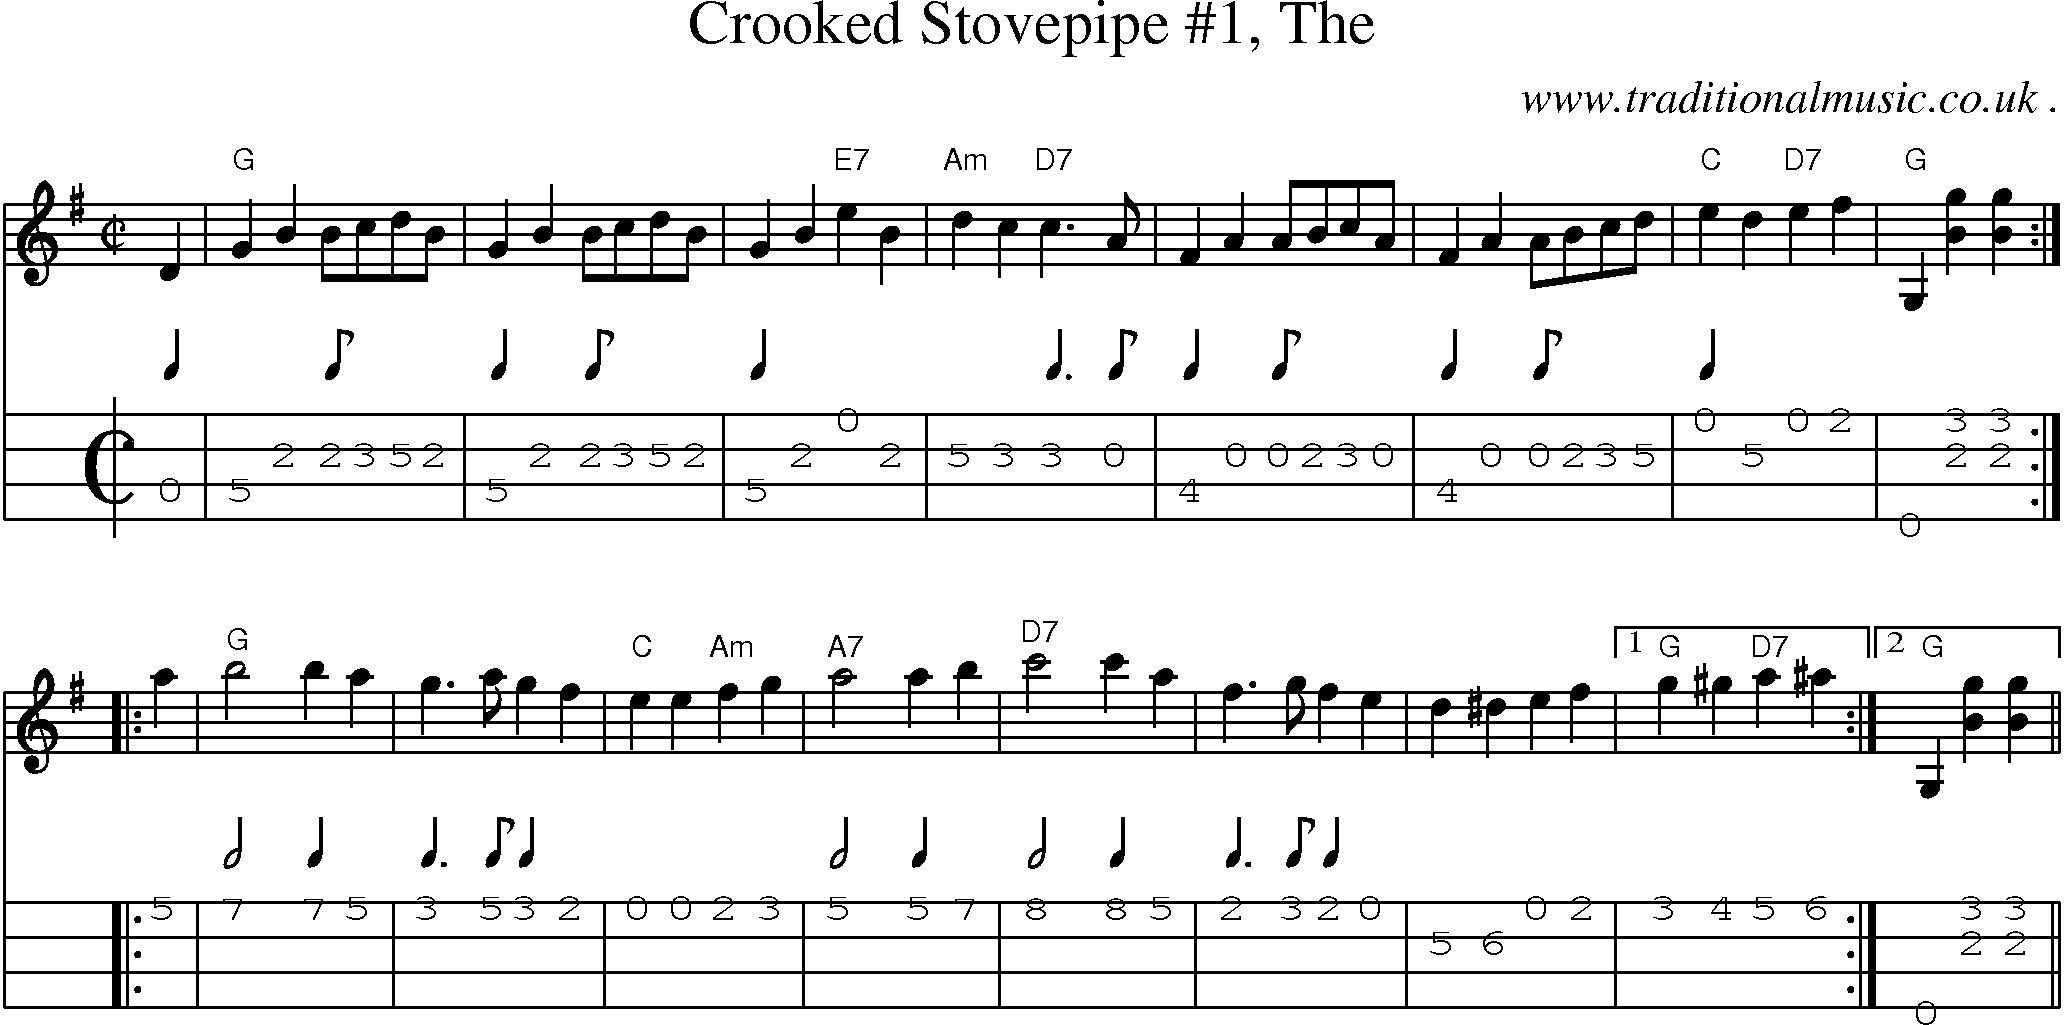 Music Score and Guitar Tabs for Crooked Stovepipe 1 The